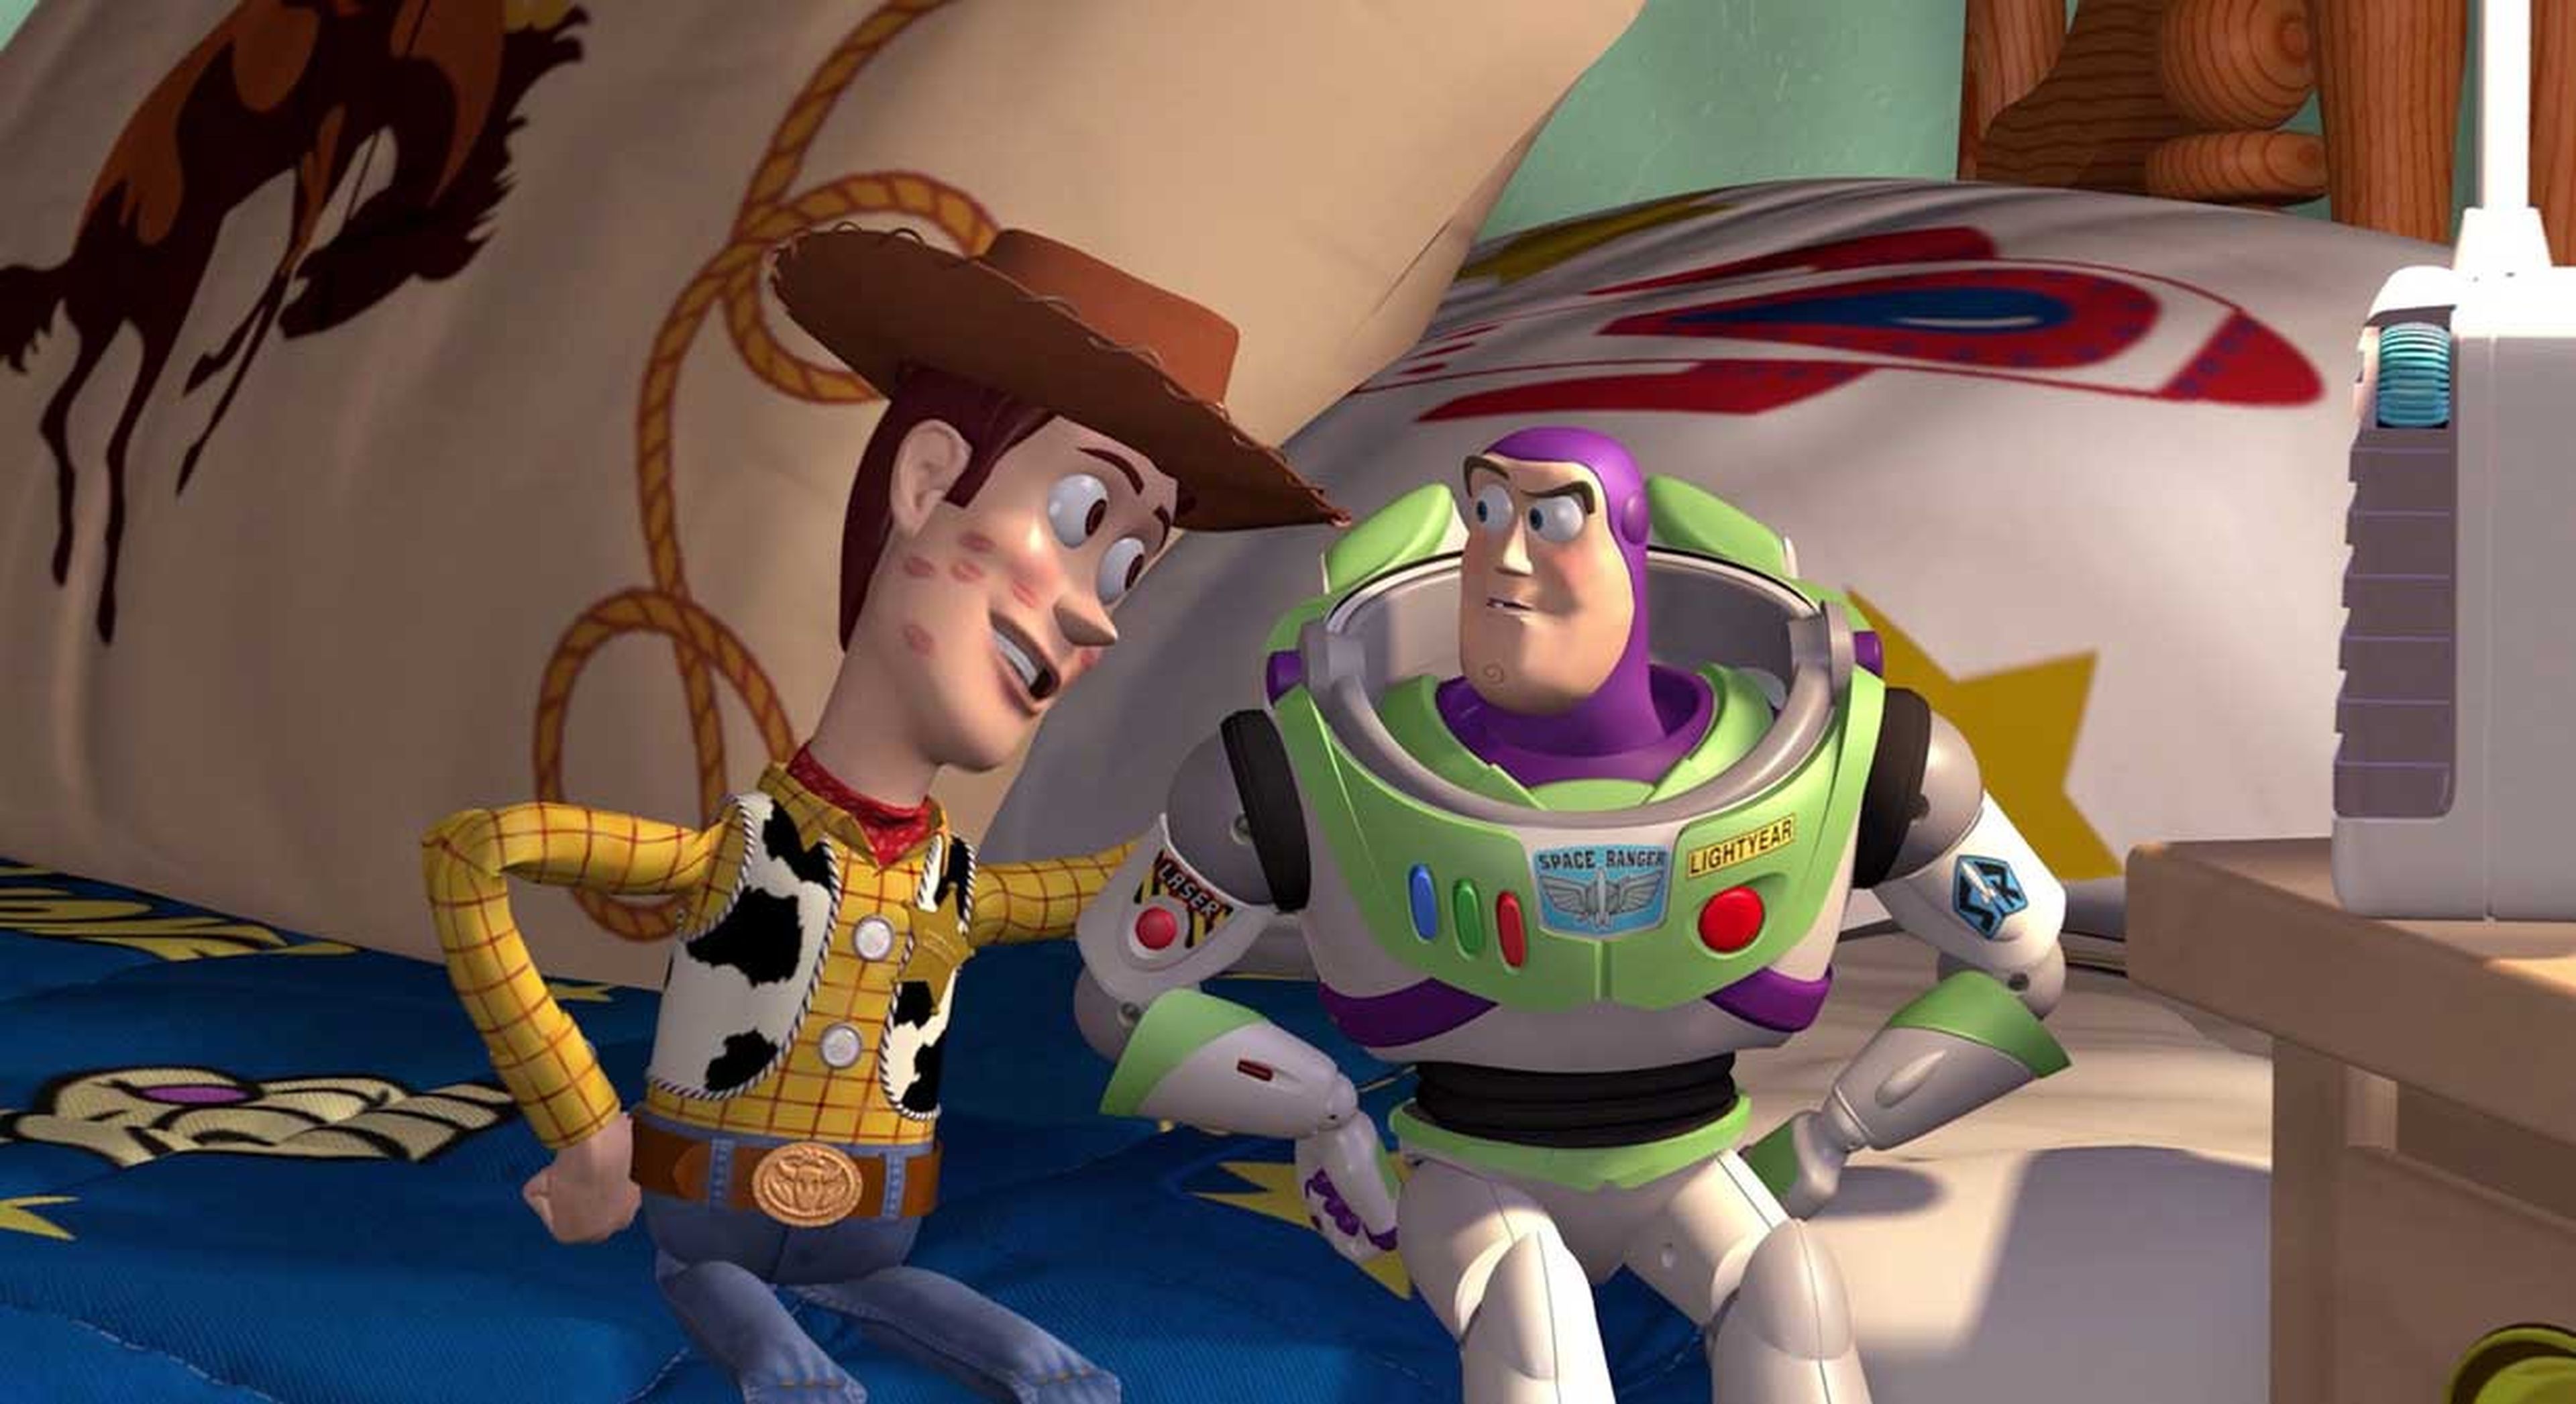 27. Toy Story 